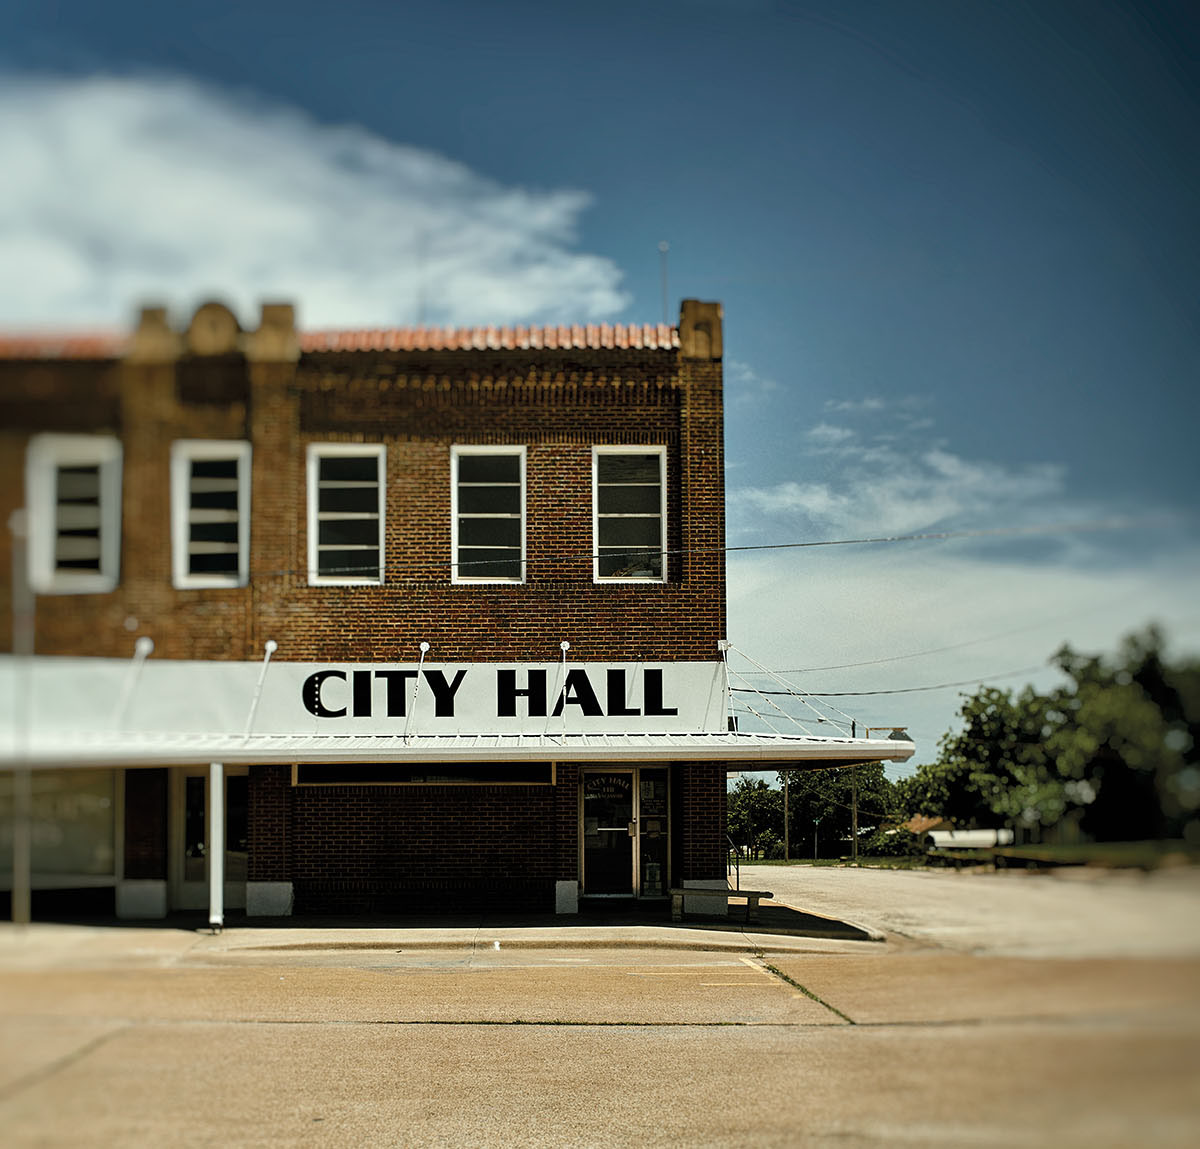 An old brick building on a concrete slab reading "City Hall"